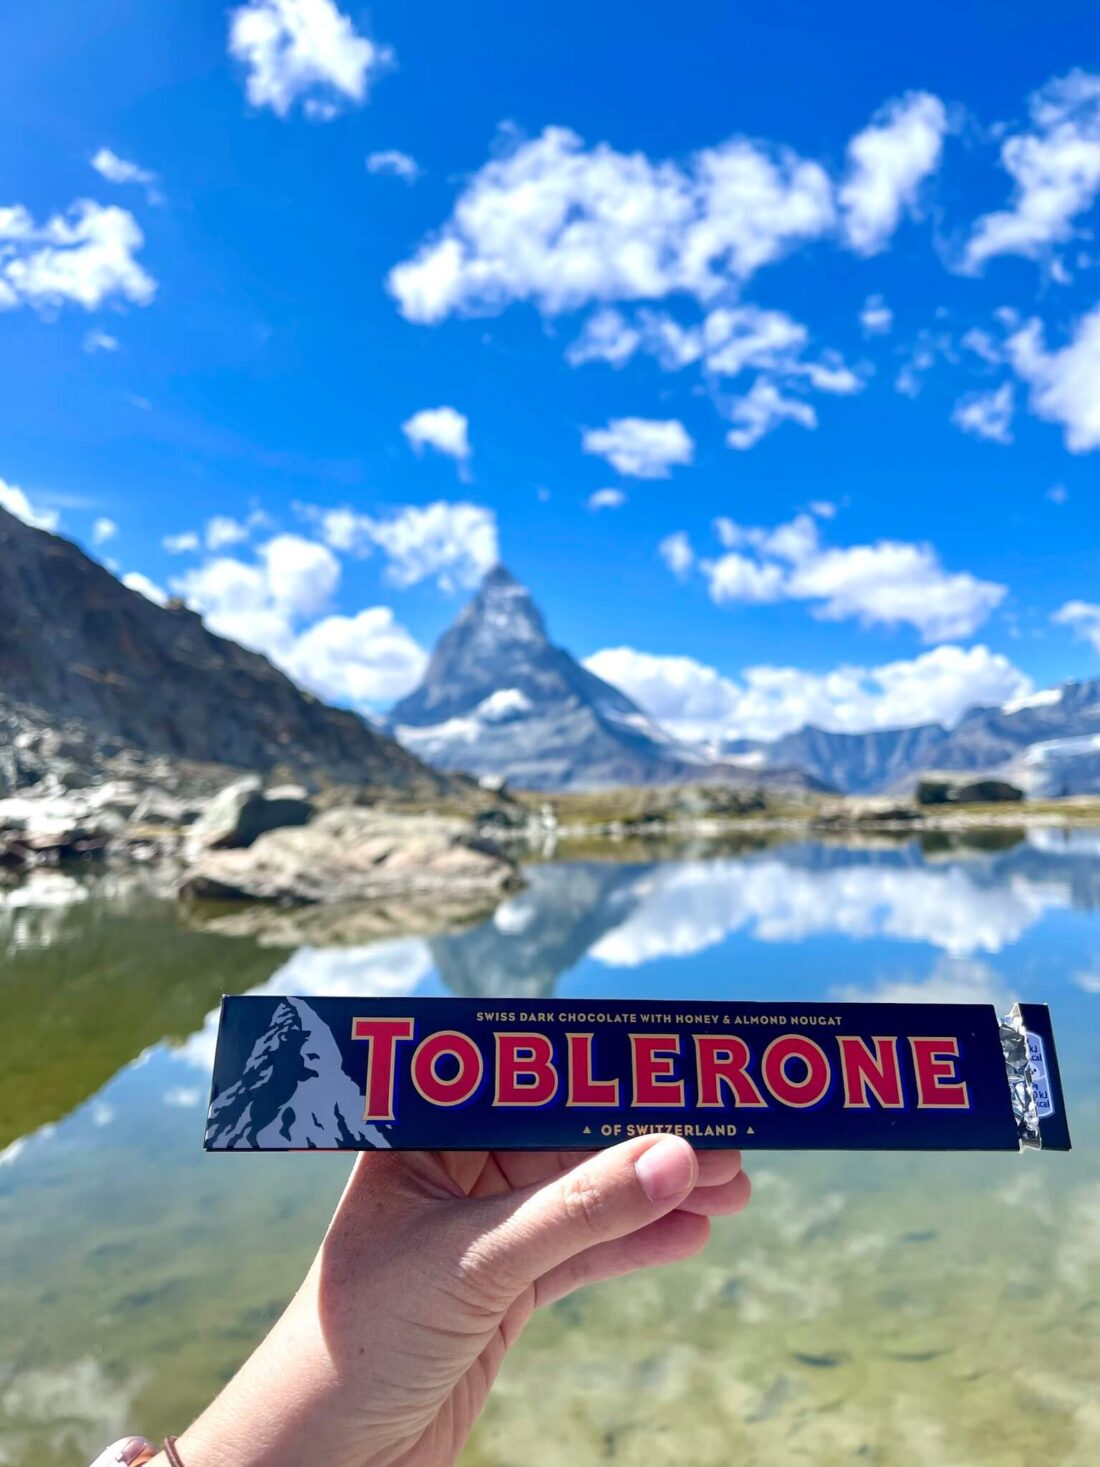 Toblerone chocolate bar being held up with the Matterhorn in the background